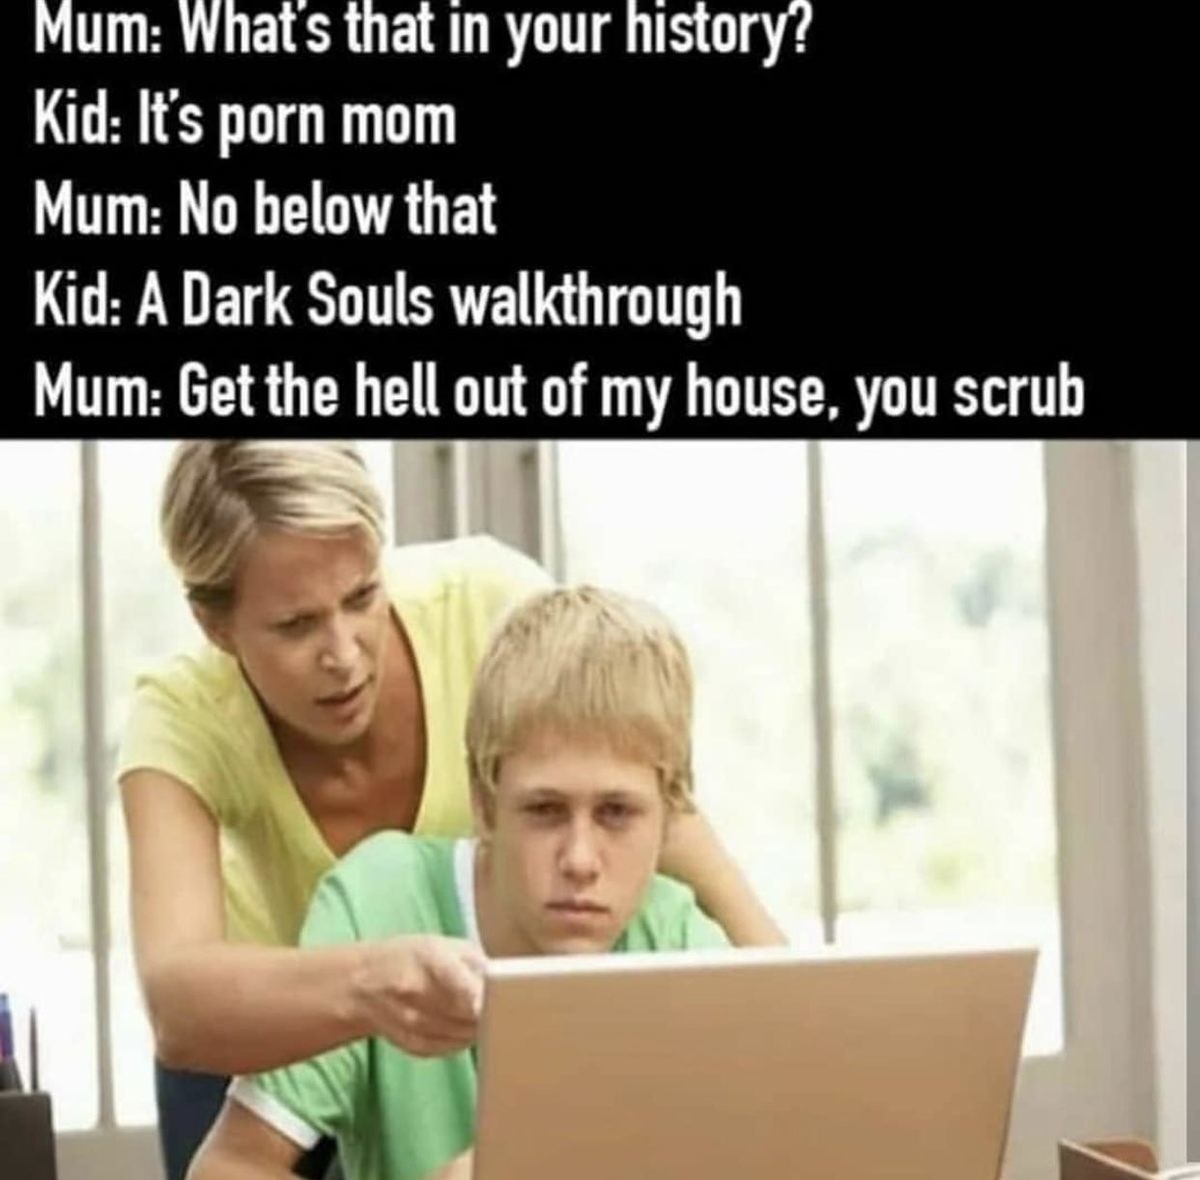 Help. . Mum: What' s that in your history? Kid: It' s porn mom Mum: No below that Kid: A Dark Souls walkthrough Mum: Get the hell out of my house. you scrub. Does getting help with a build count as a walkthrough?